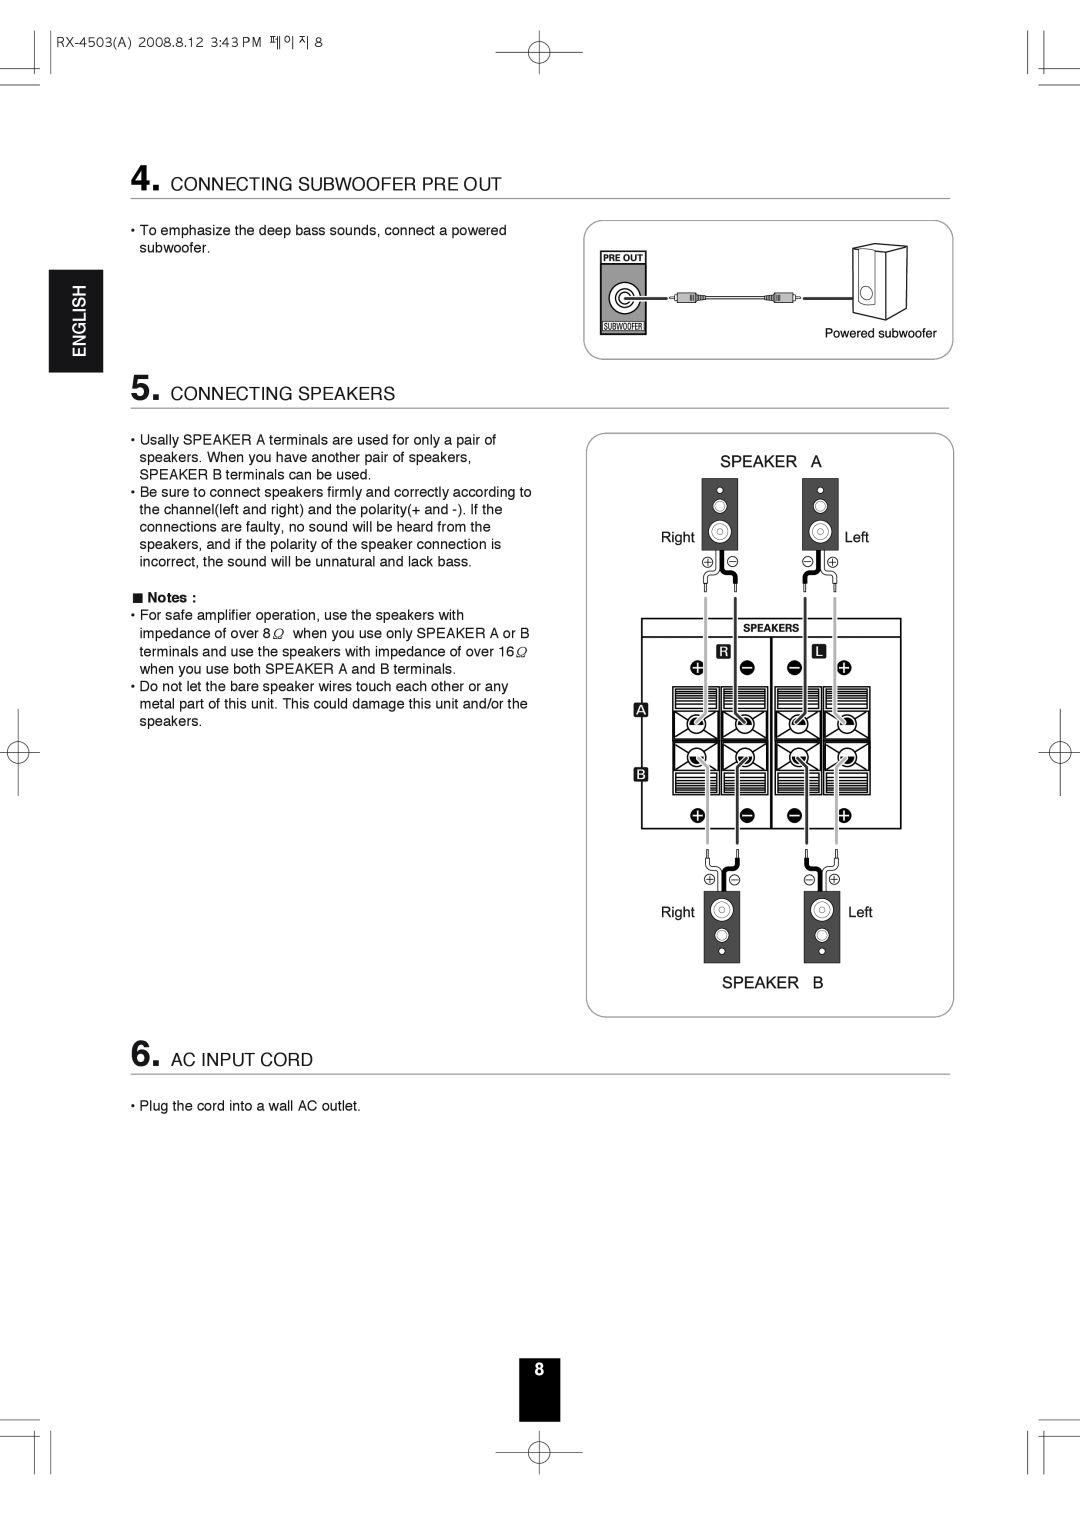 Sherwood RX-4503 operating instructions Connecting Subwoofer Pre Out, Connecting Speakers, Ac Input Cord, English 